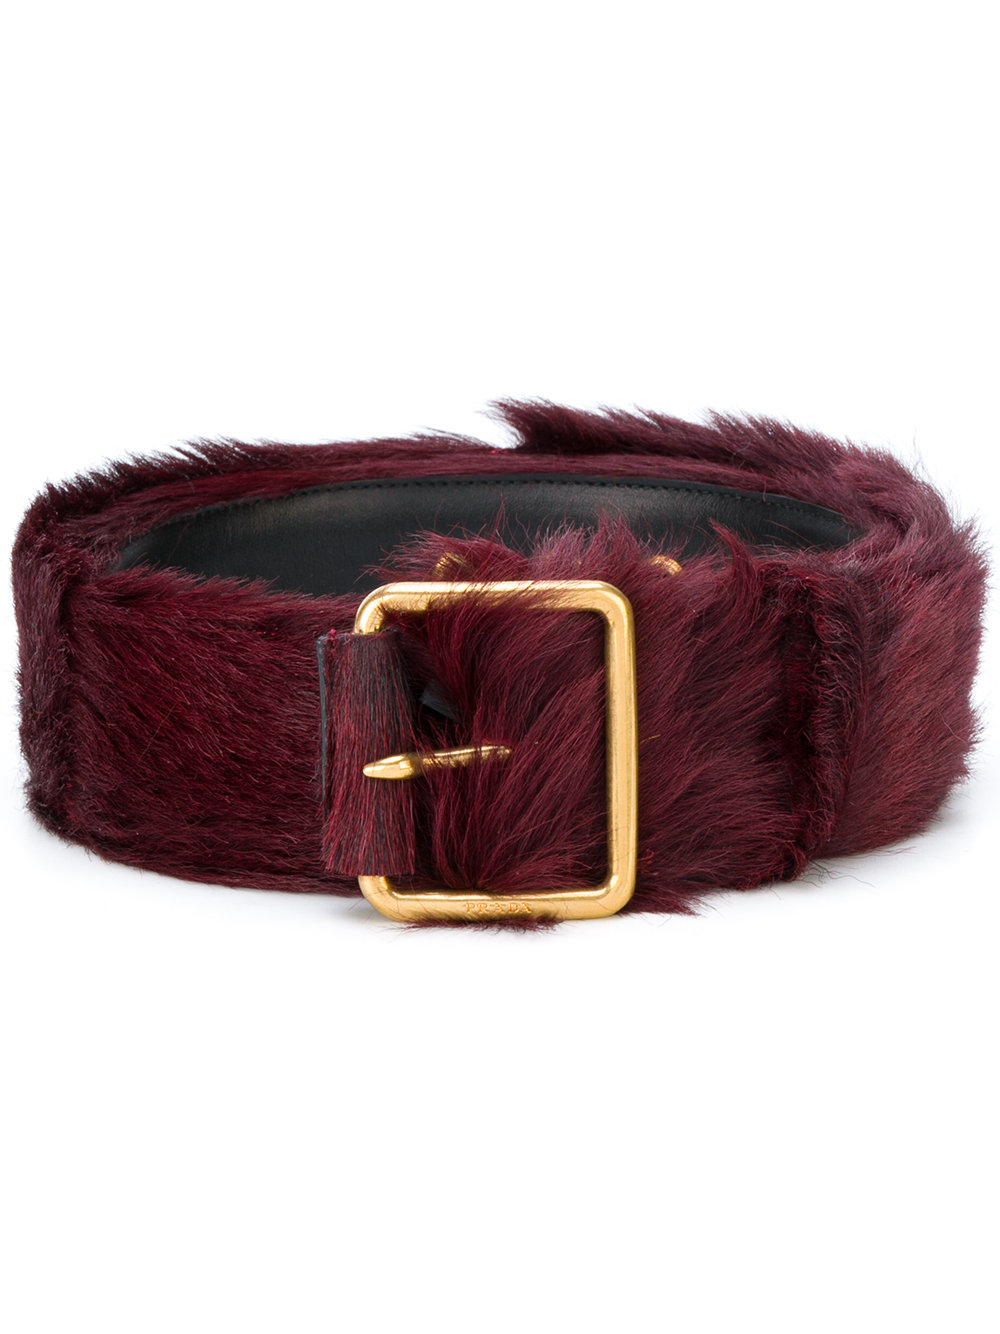 BELTS | UNTITLED BOUTIQUE THE